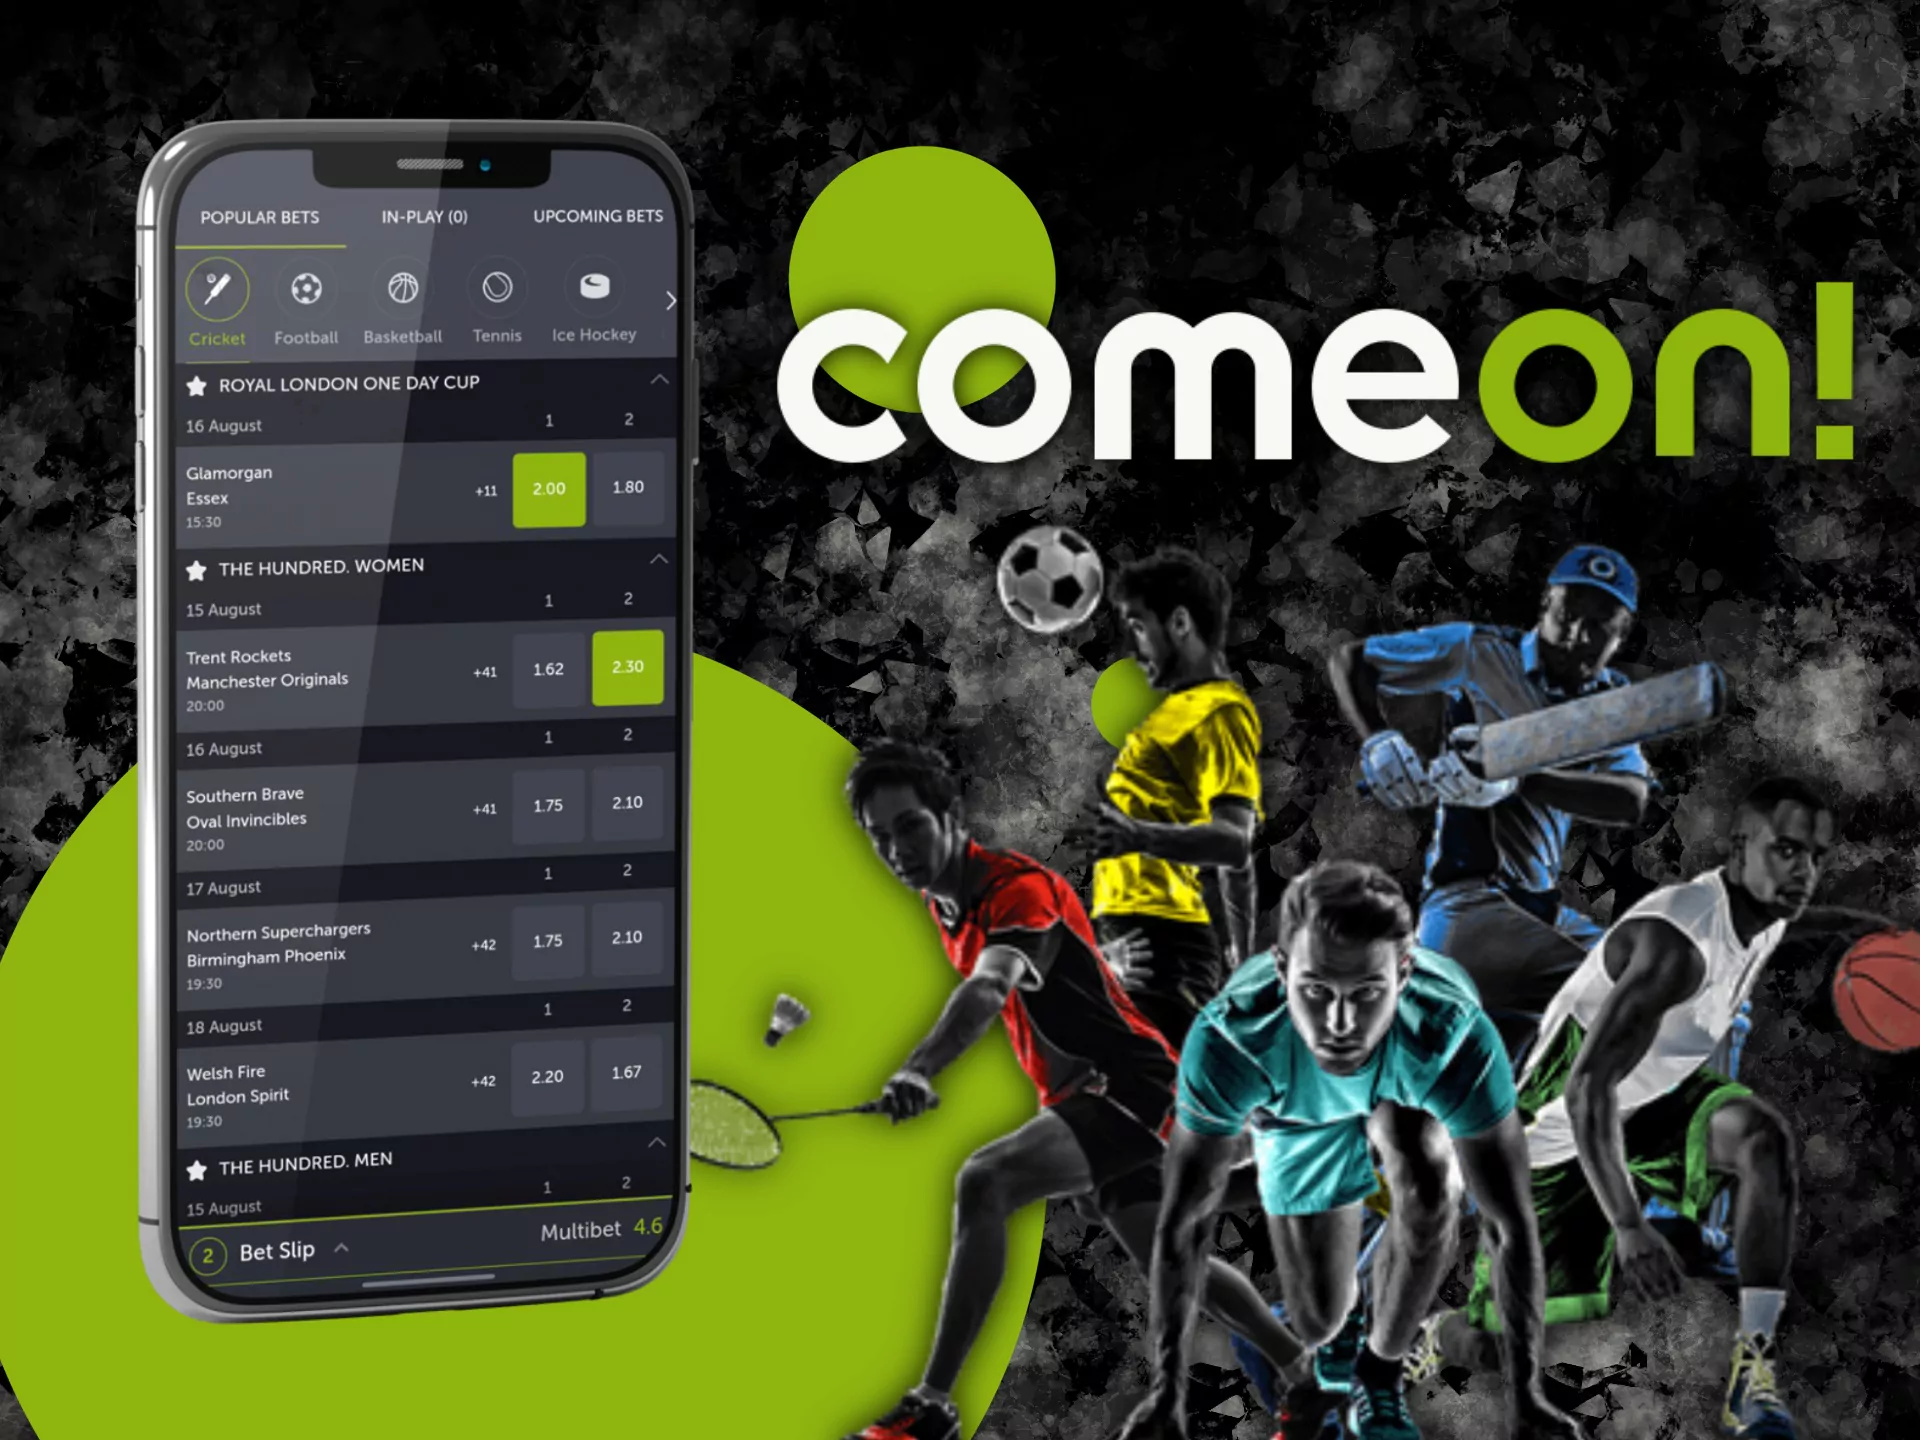 There is a list of bets types you can place on Comeon.